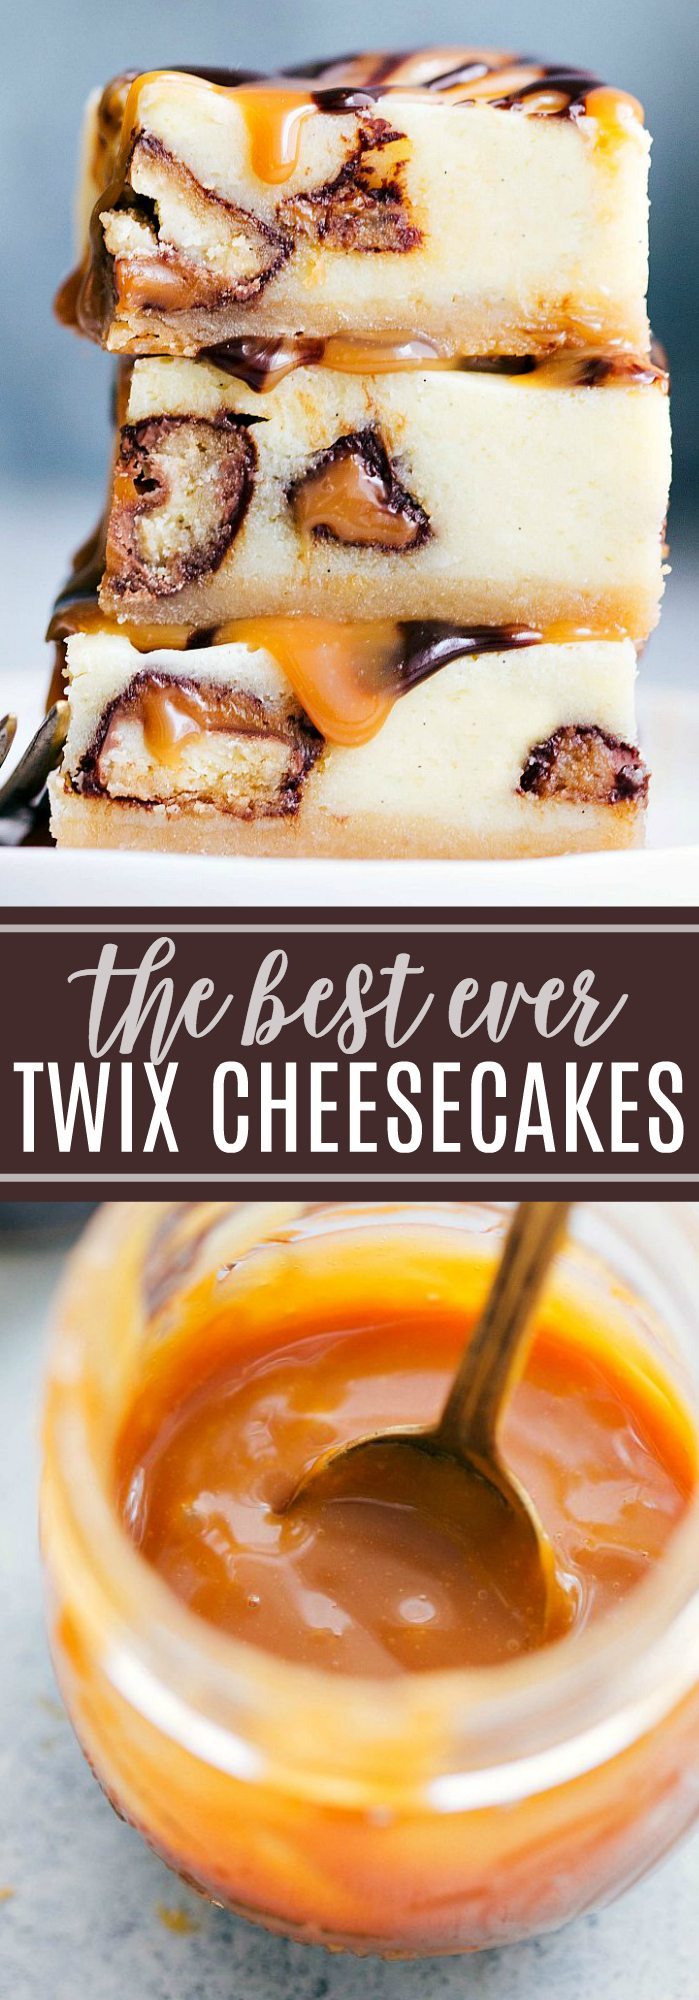 The BEST EVER Twix Cheesecake Bars with an easy (2-ingredient) caramel sauce and chocolate ganache. Everyone goes crazy over this dessert! chelseasmessyapron.com #twix #cheesecake #bars #caramel #chocolate #sauce #ganache #shortbread #crust #easy #dessert #desserts #kidfriendly #cheesecakes